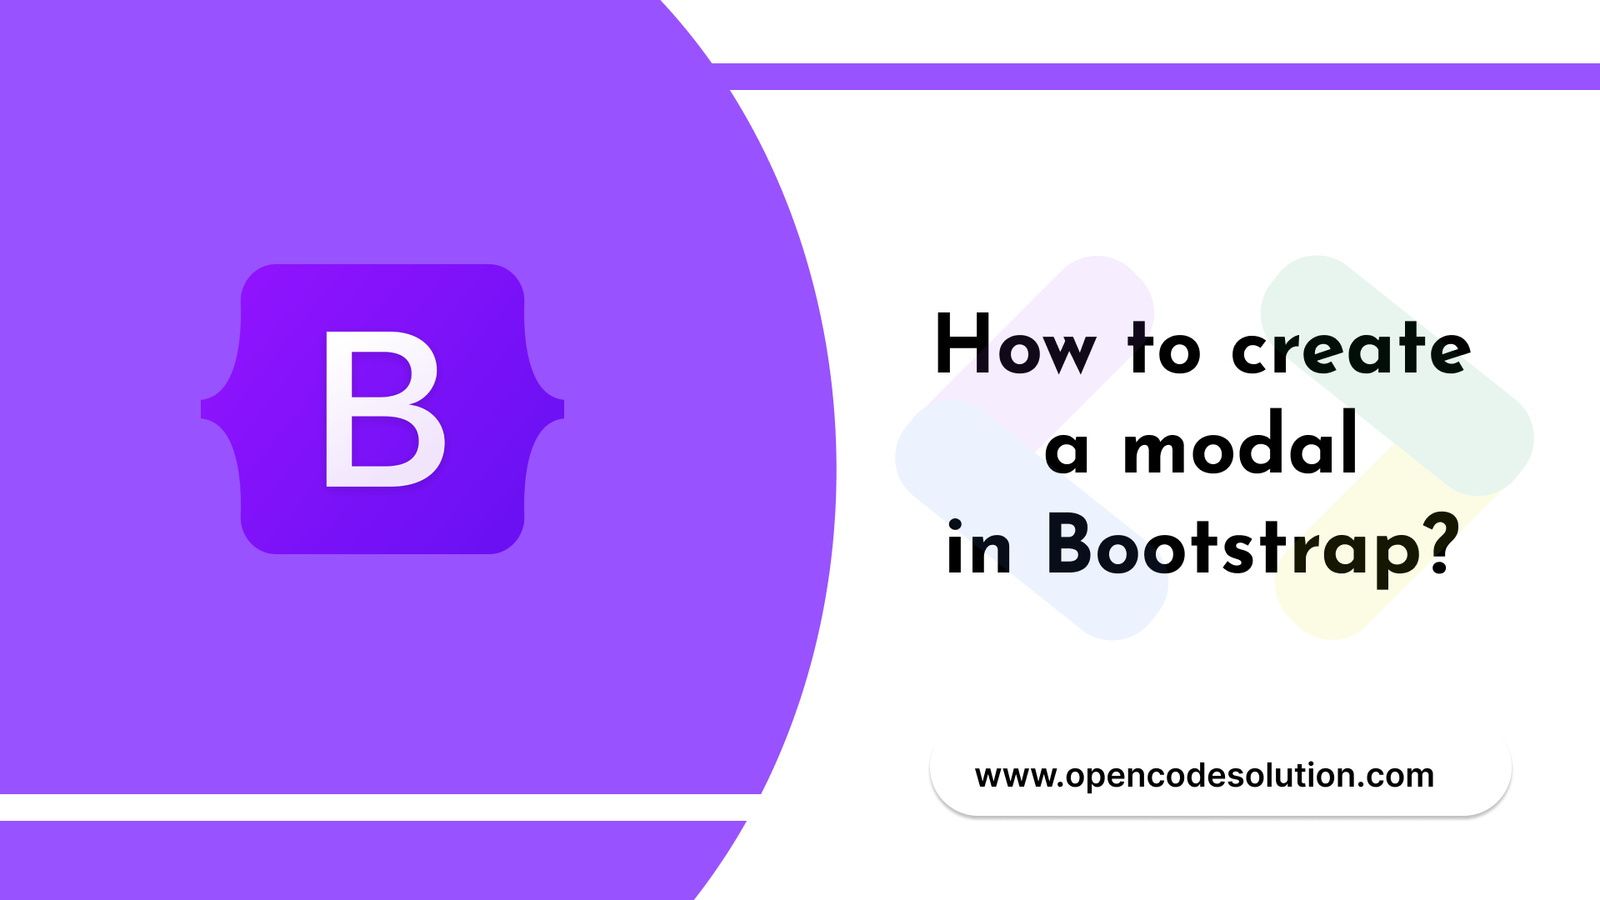 How to create a modal in Bootstrap?